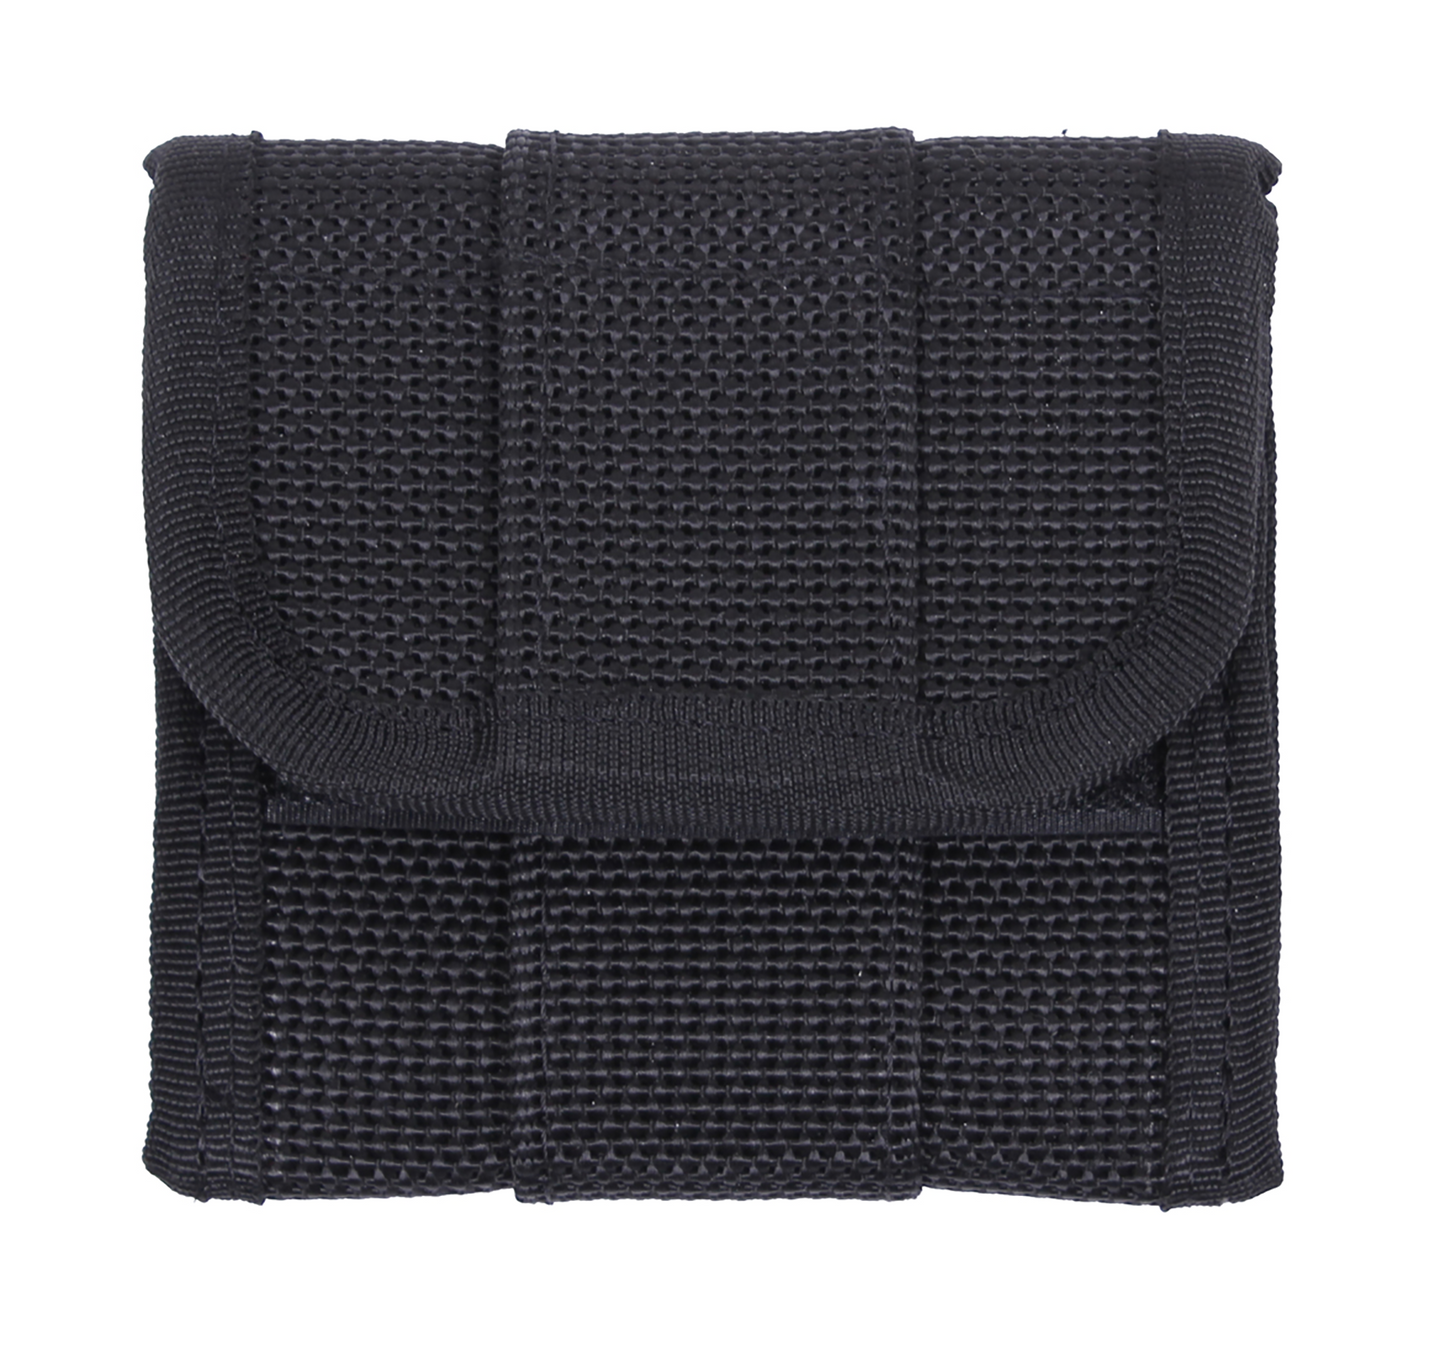 Latex Glove Pouch For Police Duty Belt